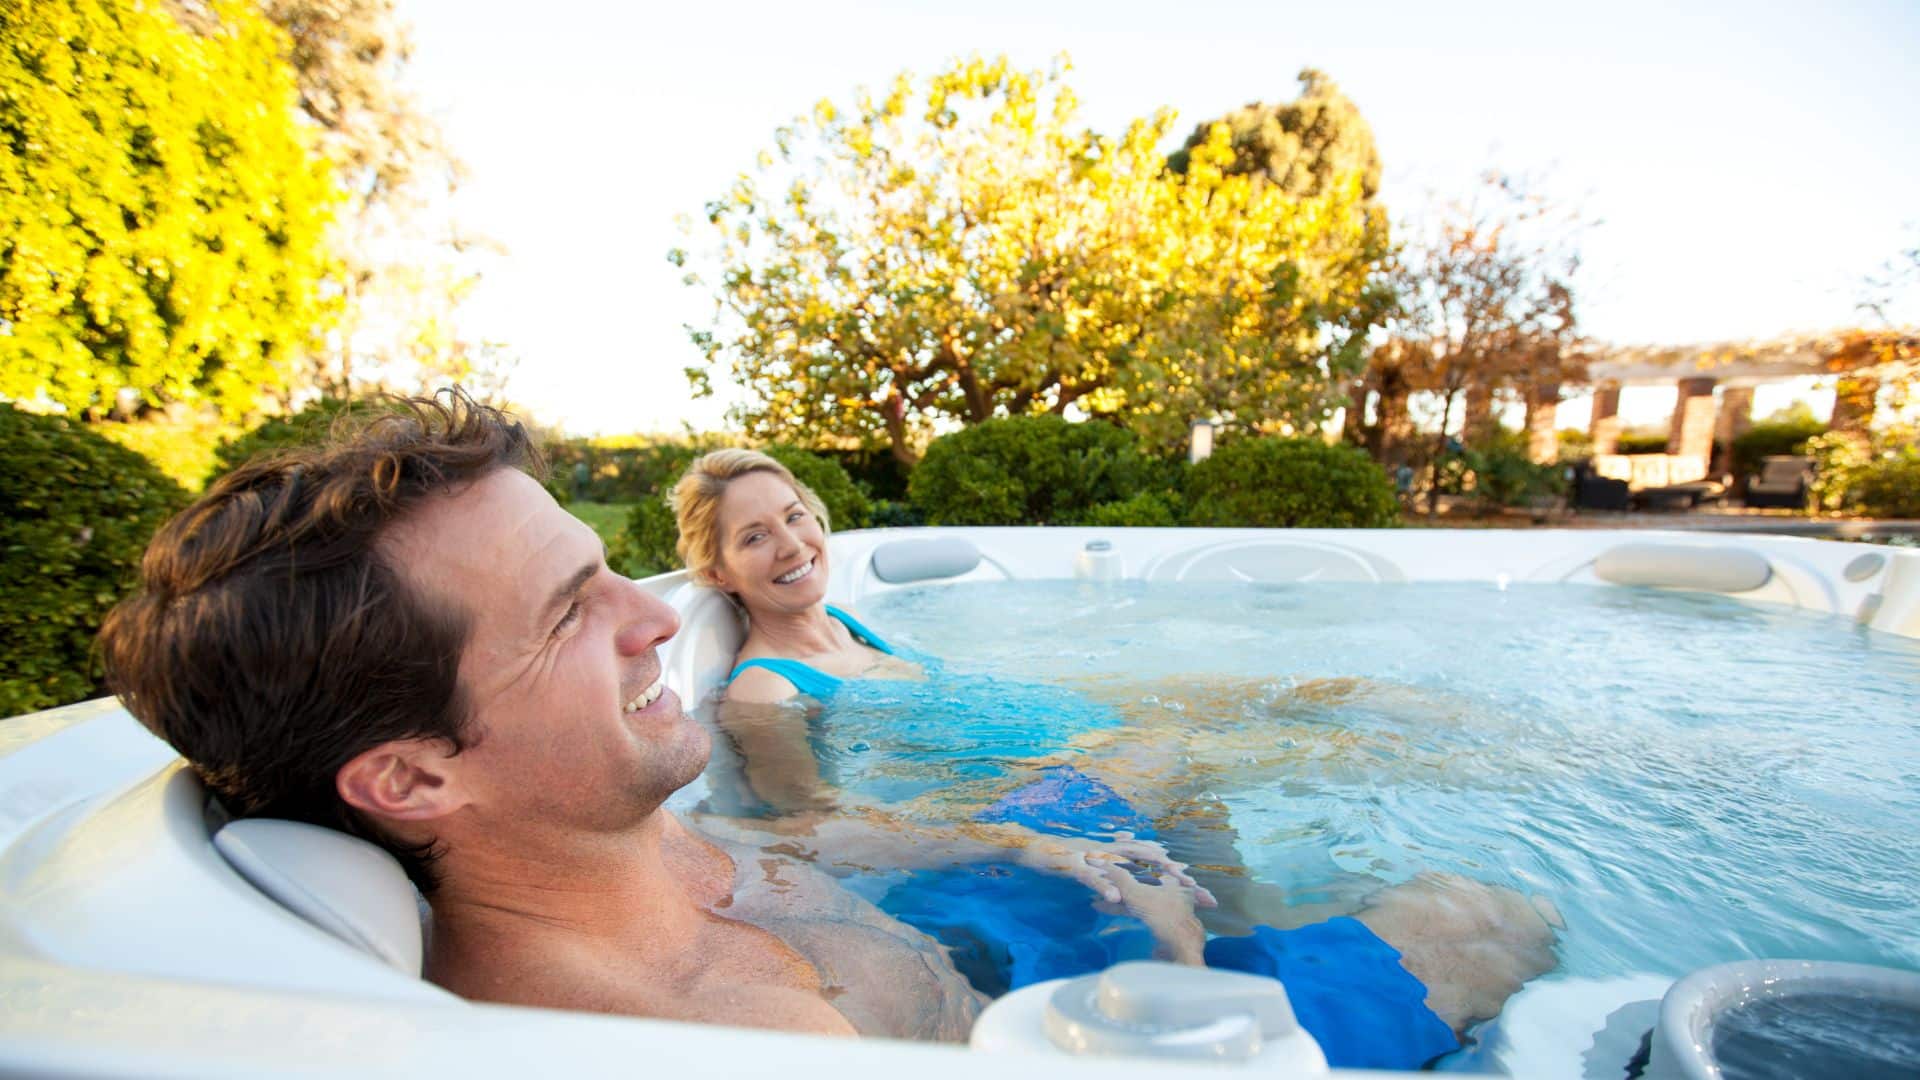 Maximize Your Hot Tub Wellness with These 5 Tips